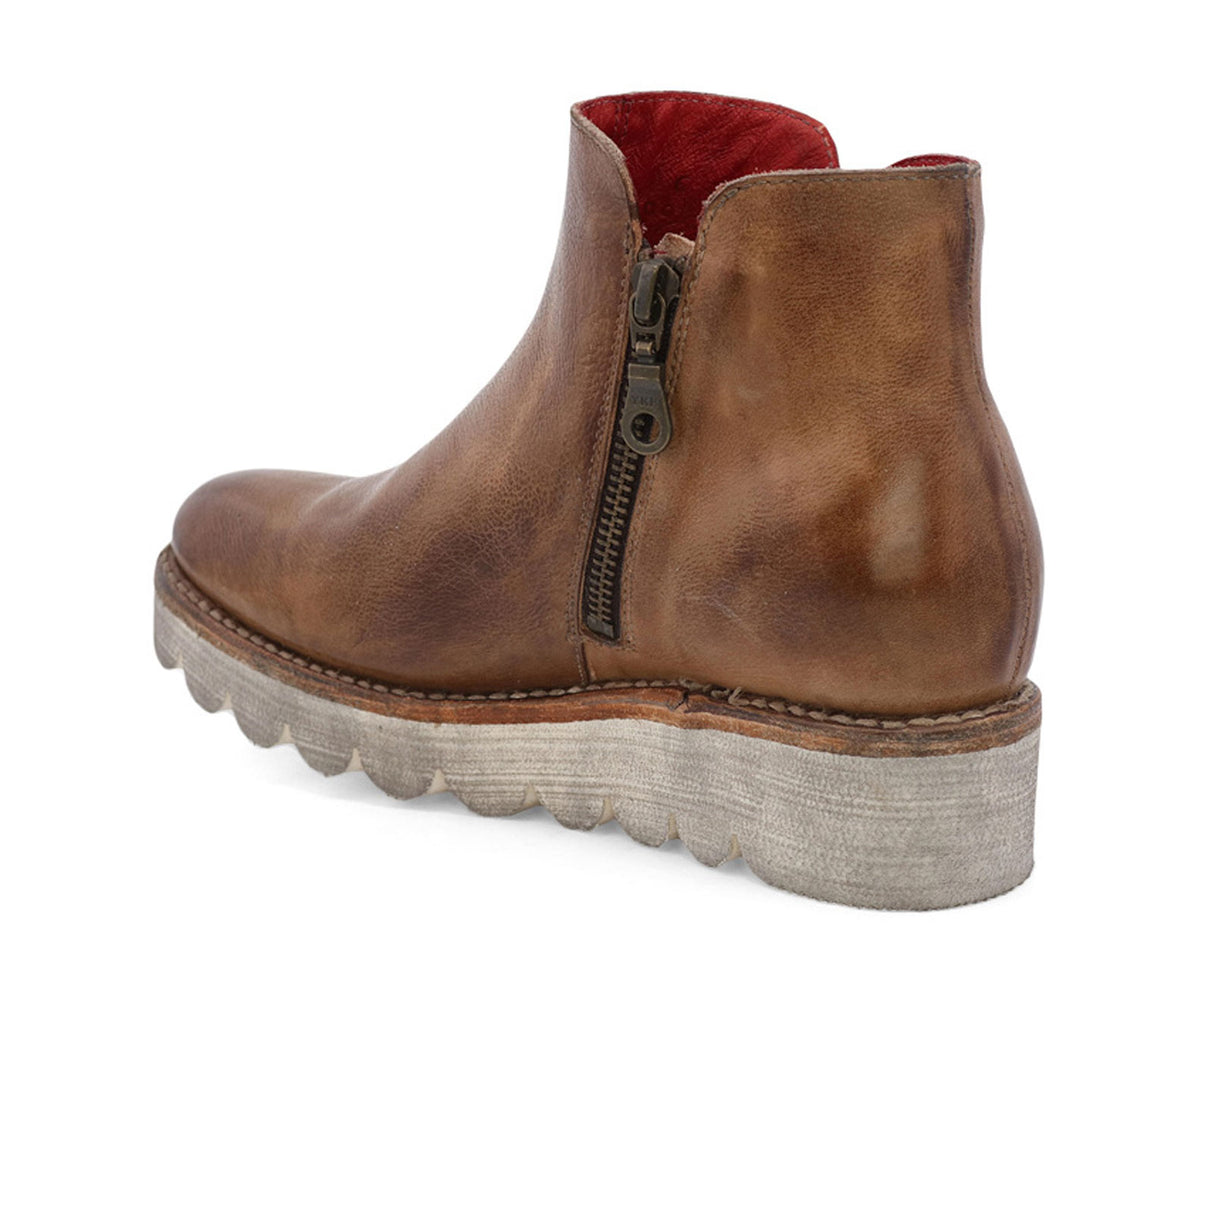 Bed Stu Lydyi Ankle Boot (Women) - Tan Rustic Boots - Casual - Low - The Heel Shoe Fitters